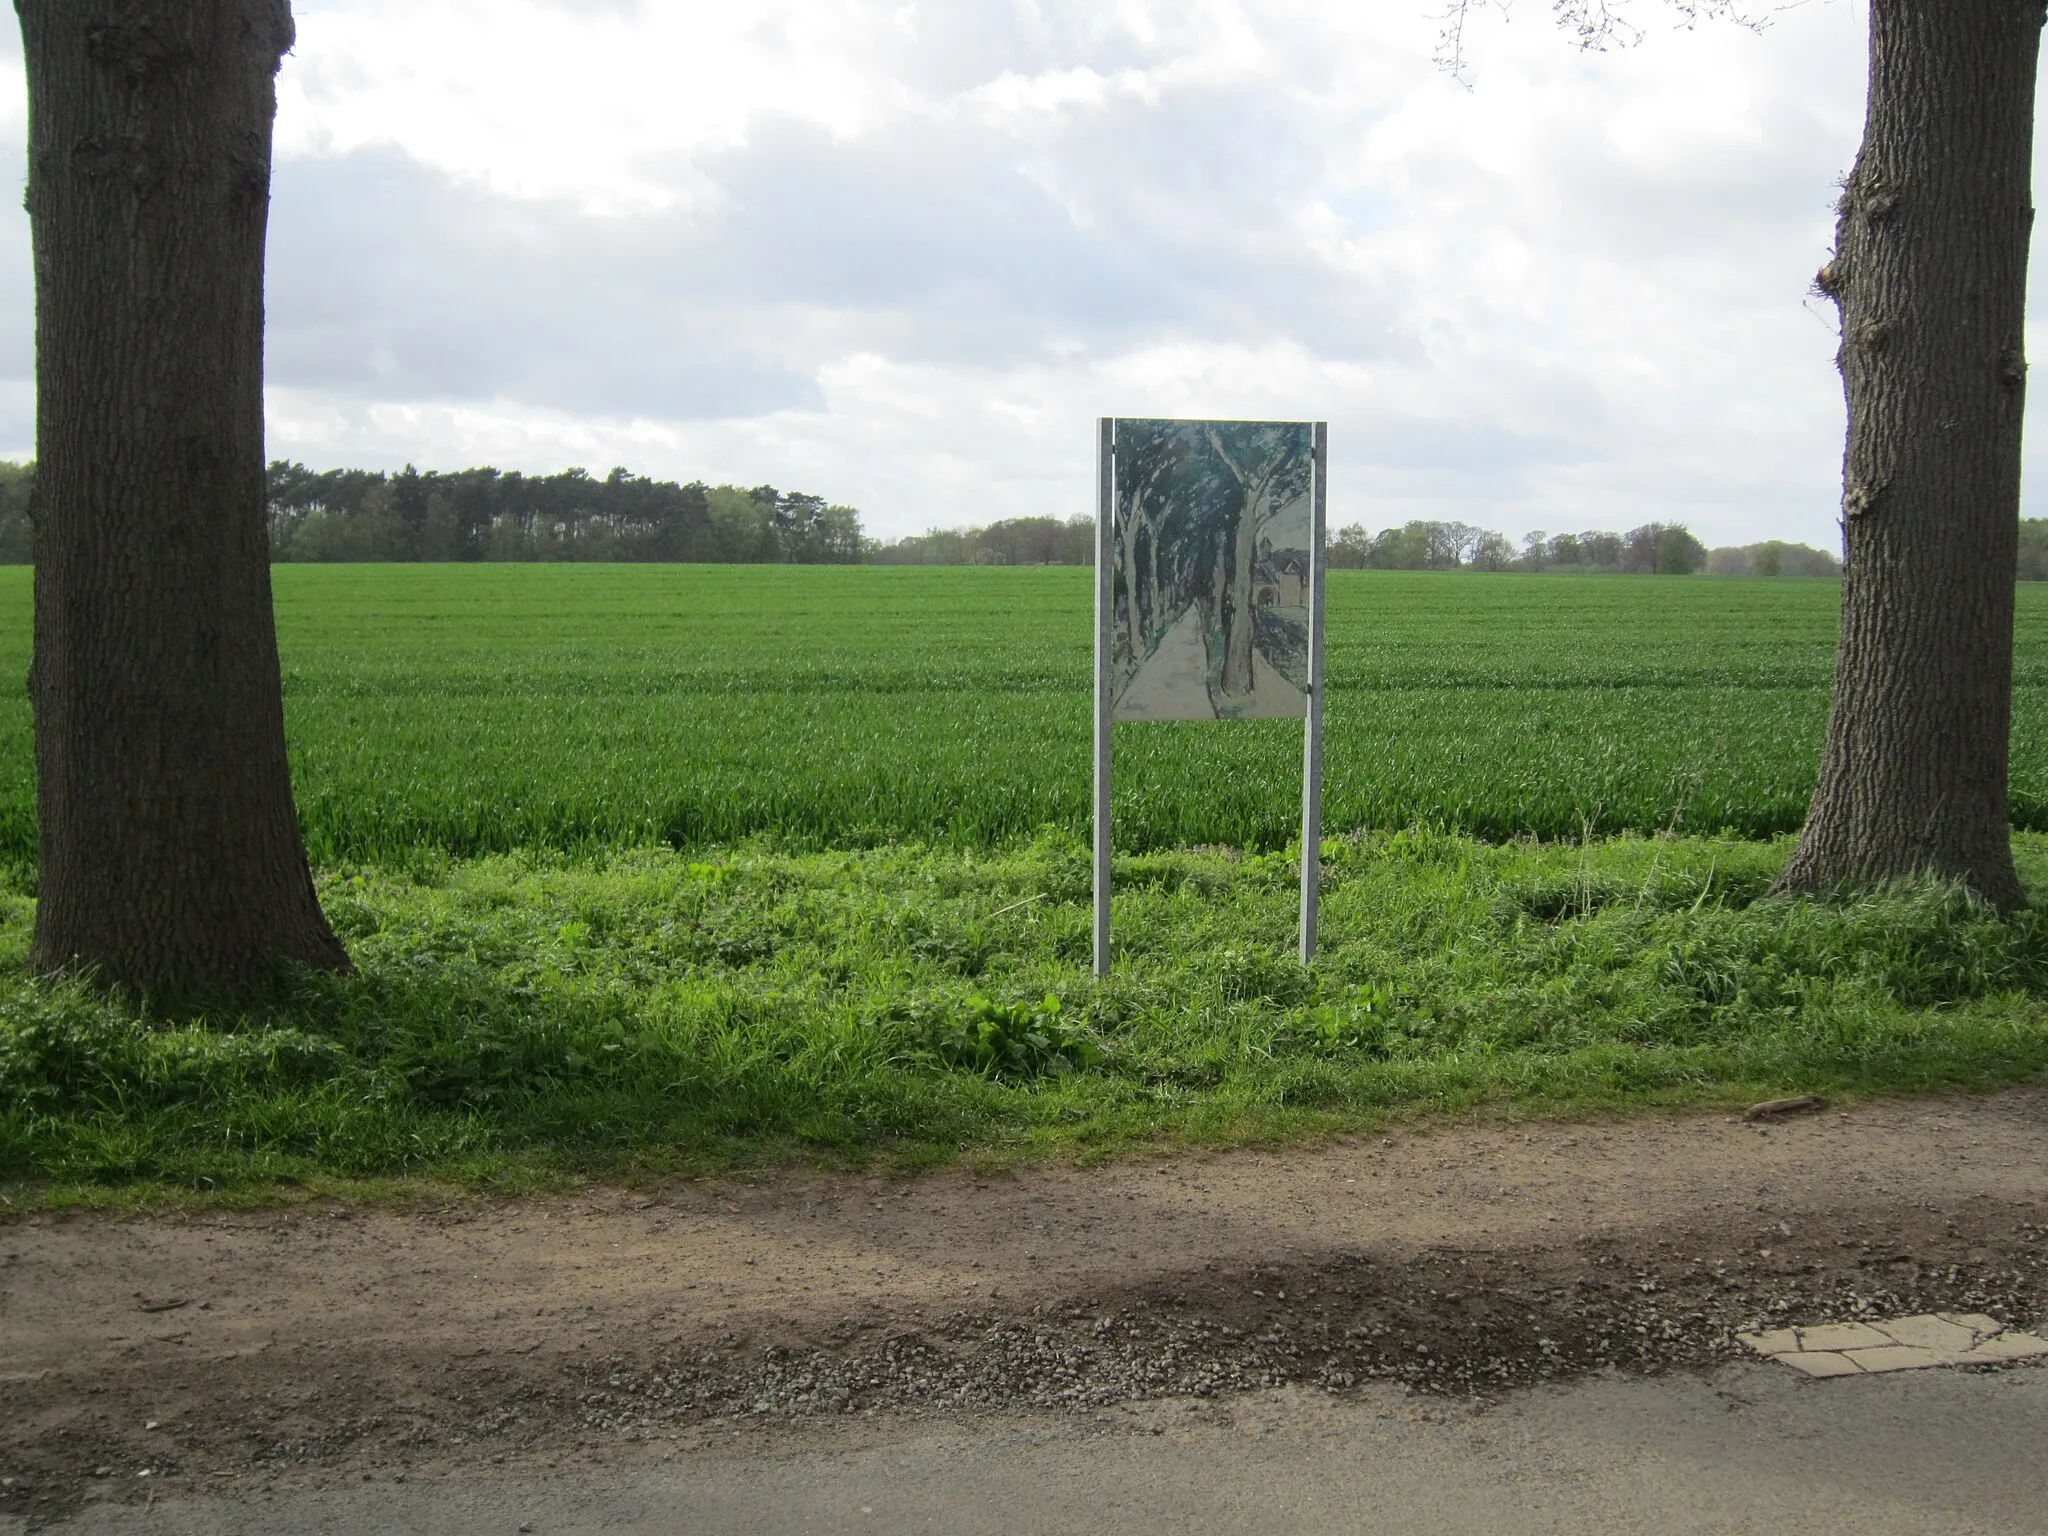 Photo showing: Painting showing the avenue leading to the manour house of "Gut Vehr" near Quakenbrück, posed between two avenue trees